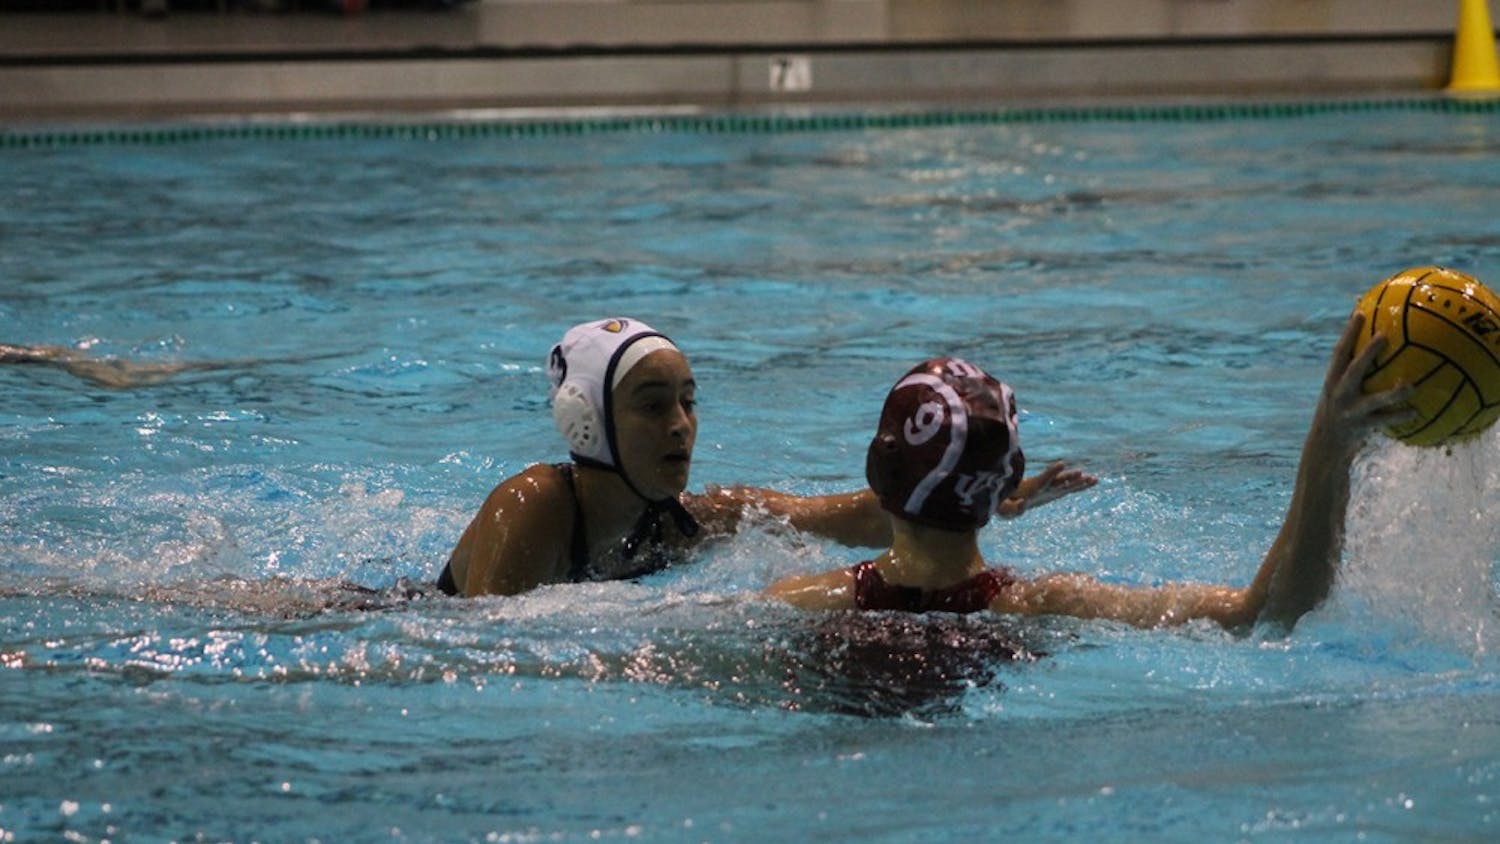 California Baptist University sophomore, Lizette Perez, reaches for the ball that IU junior Sarah Myers is defending during the match-up Saturday. Myers finished the game with one goal and one assist helping the Hoosiers defeat the Lancer 13-6.